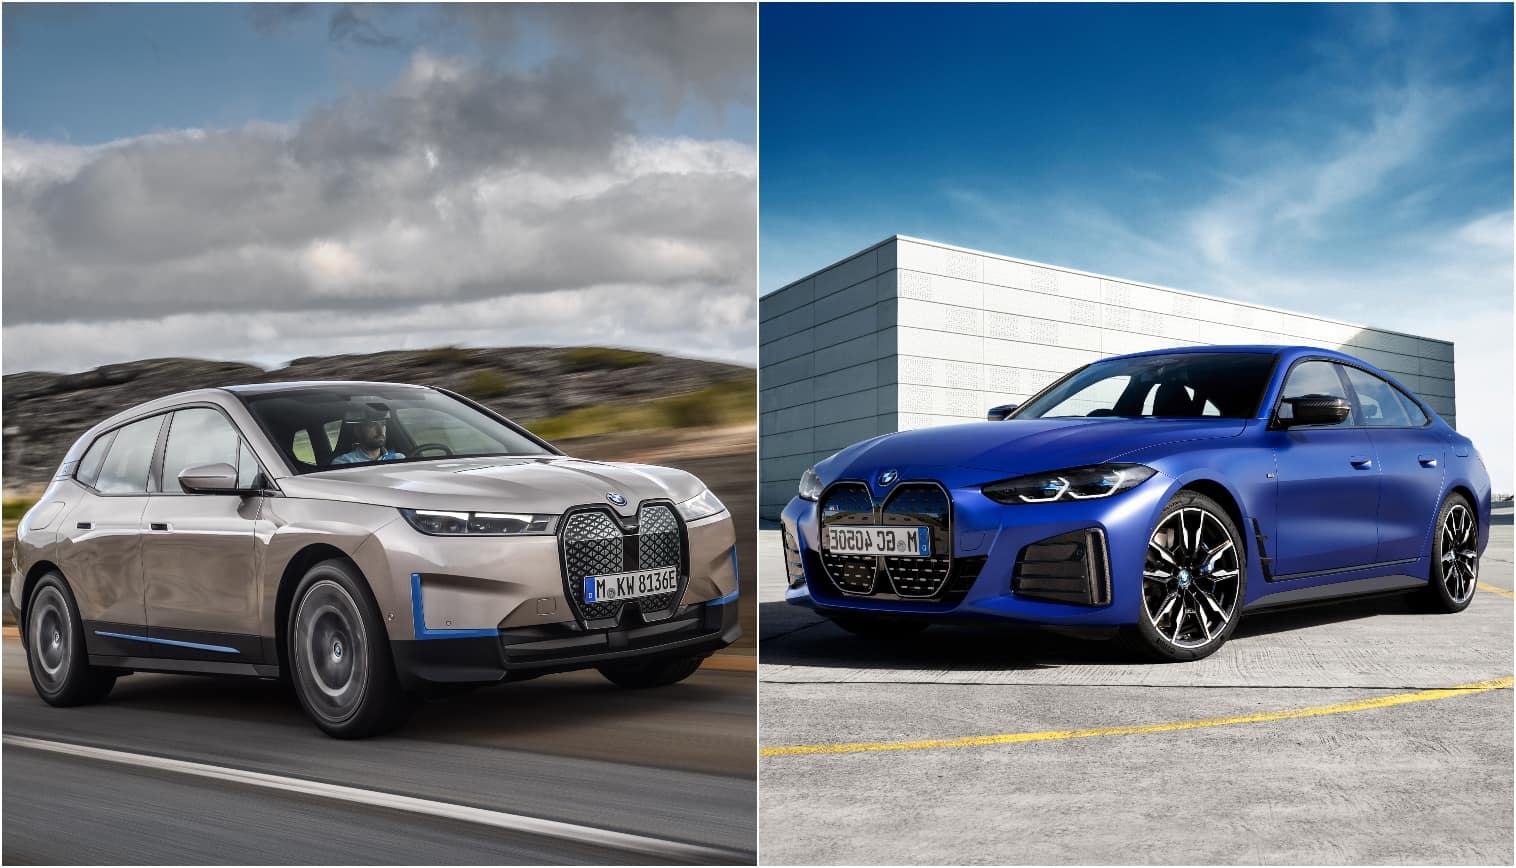 BMW Electric Cars India launch in 2022 - Two New Models Considered||BMW iX SUV|BMW i4 